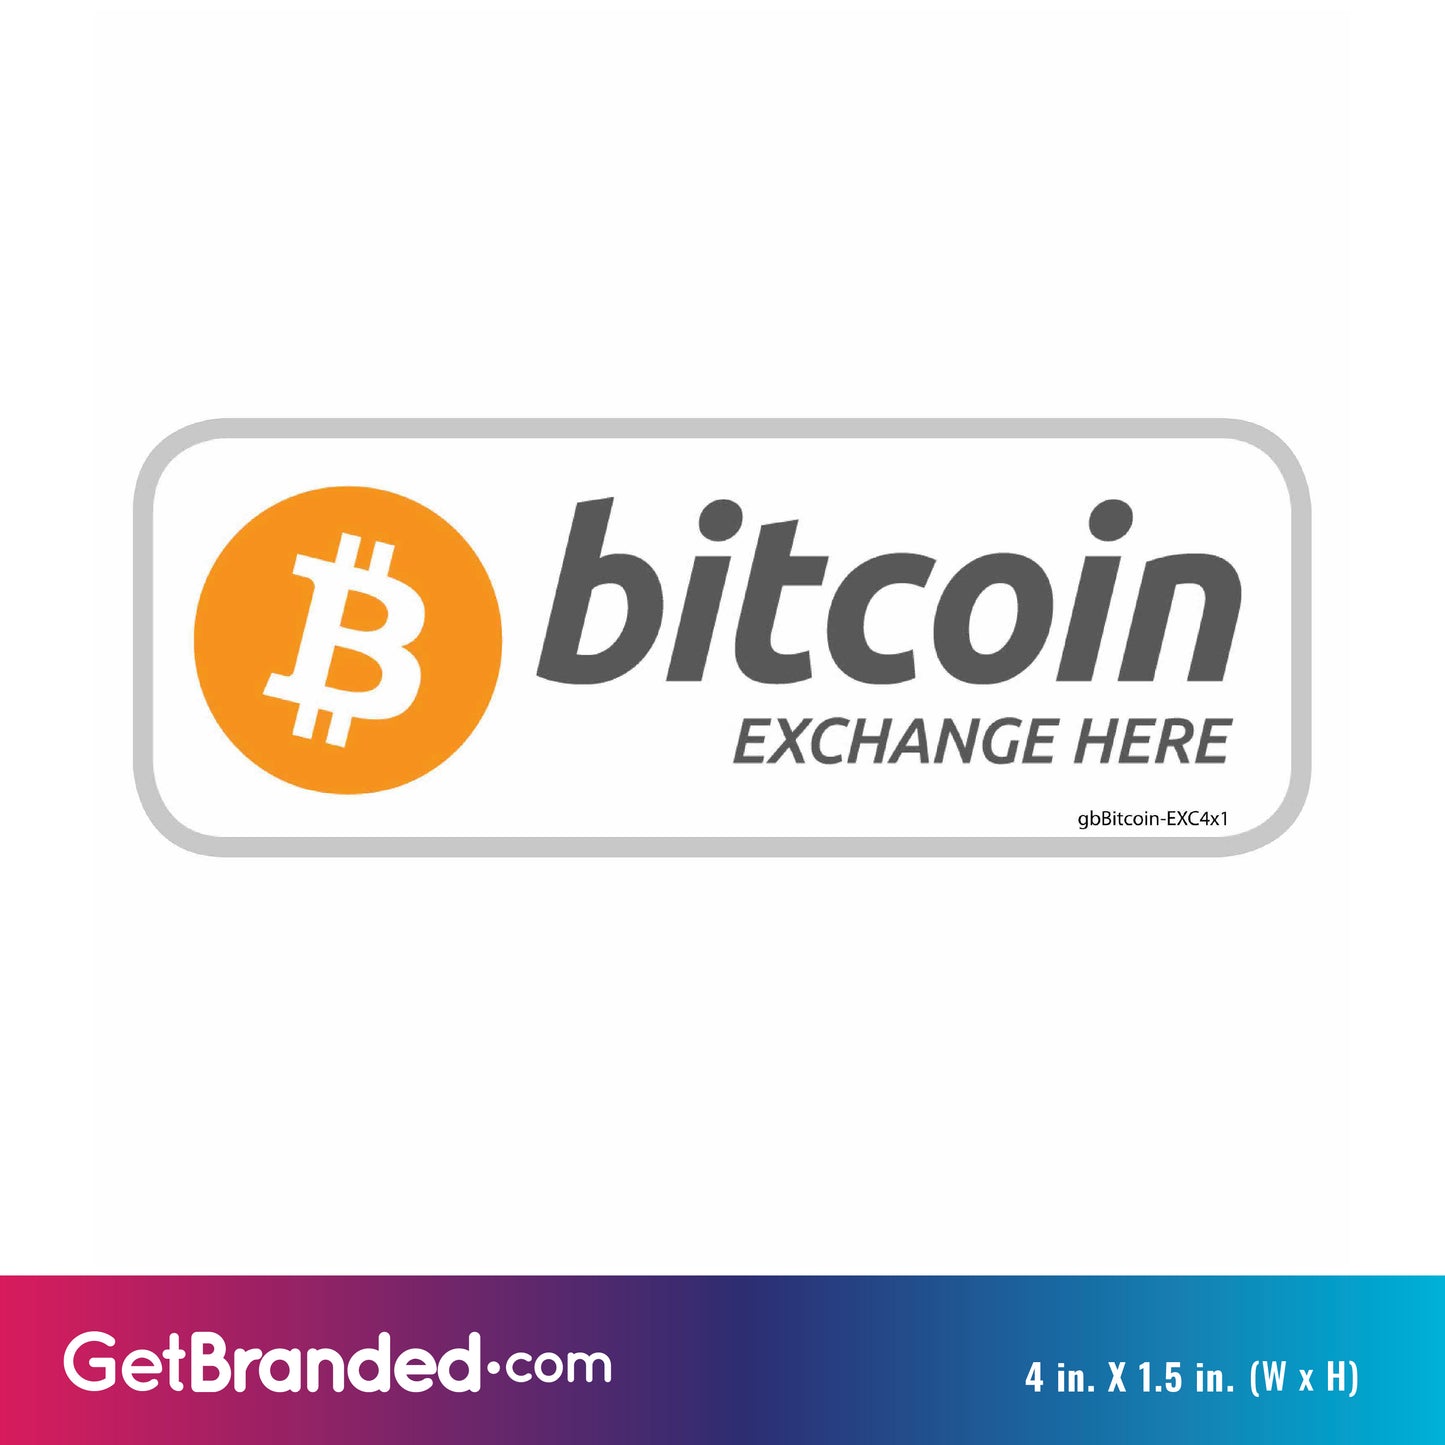 Bitcoin Exchange Here Decal size guide. 4 inches by 1.5 inches in size.